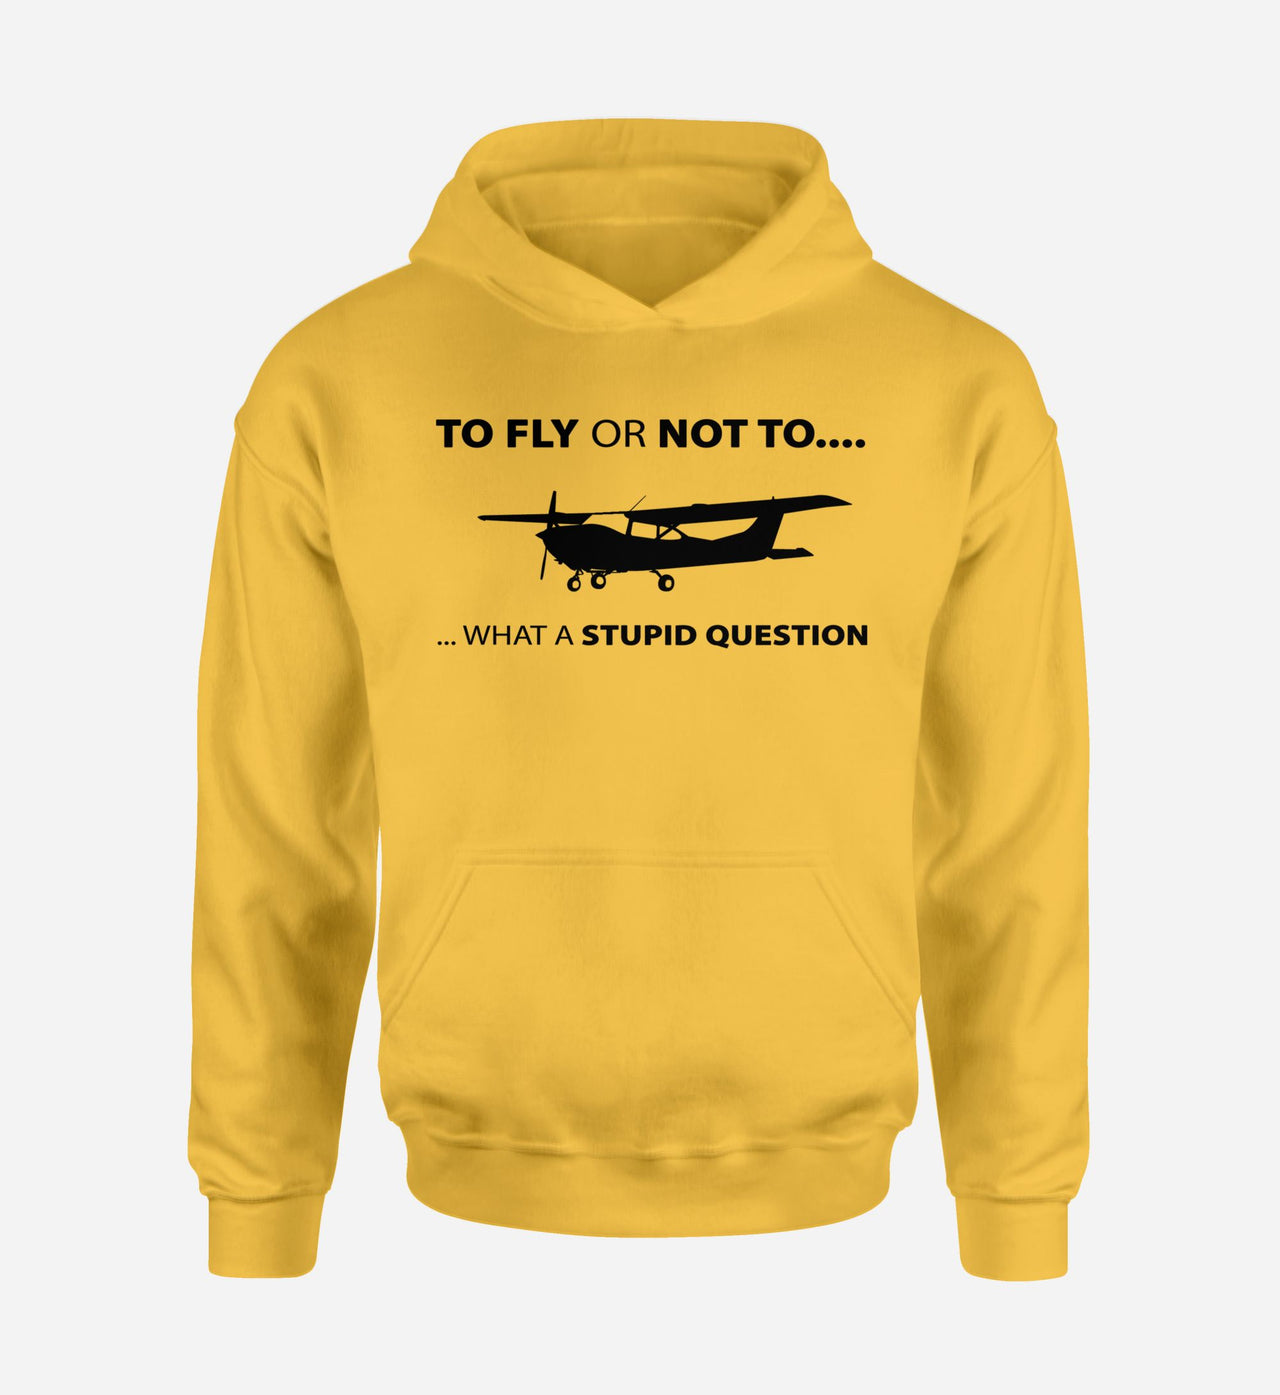 To Fly or Not To What a Stupid Question Designed Hoodies